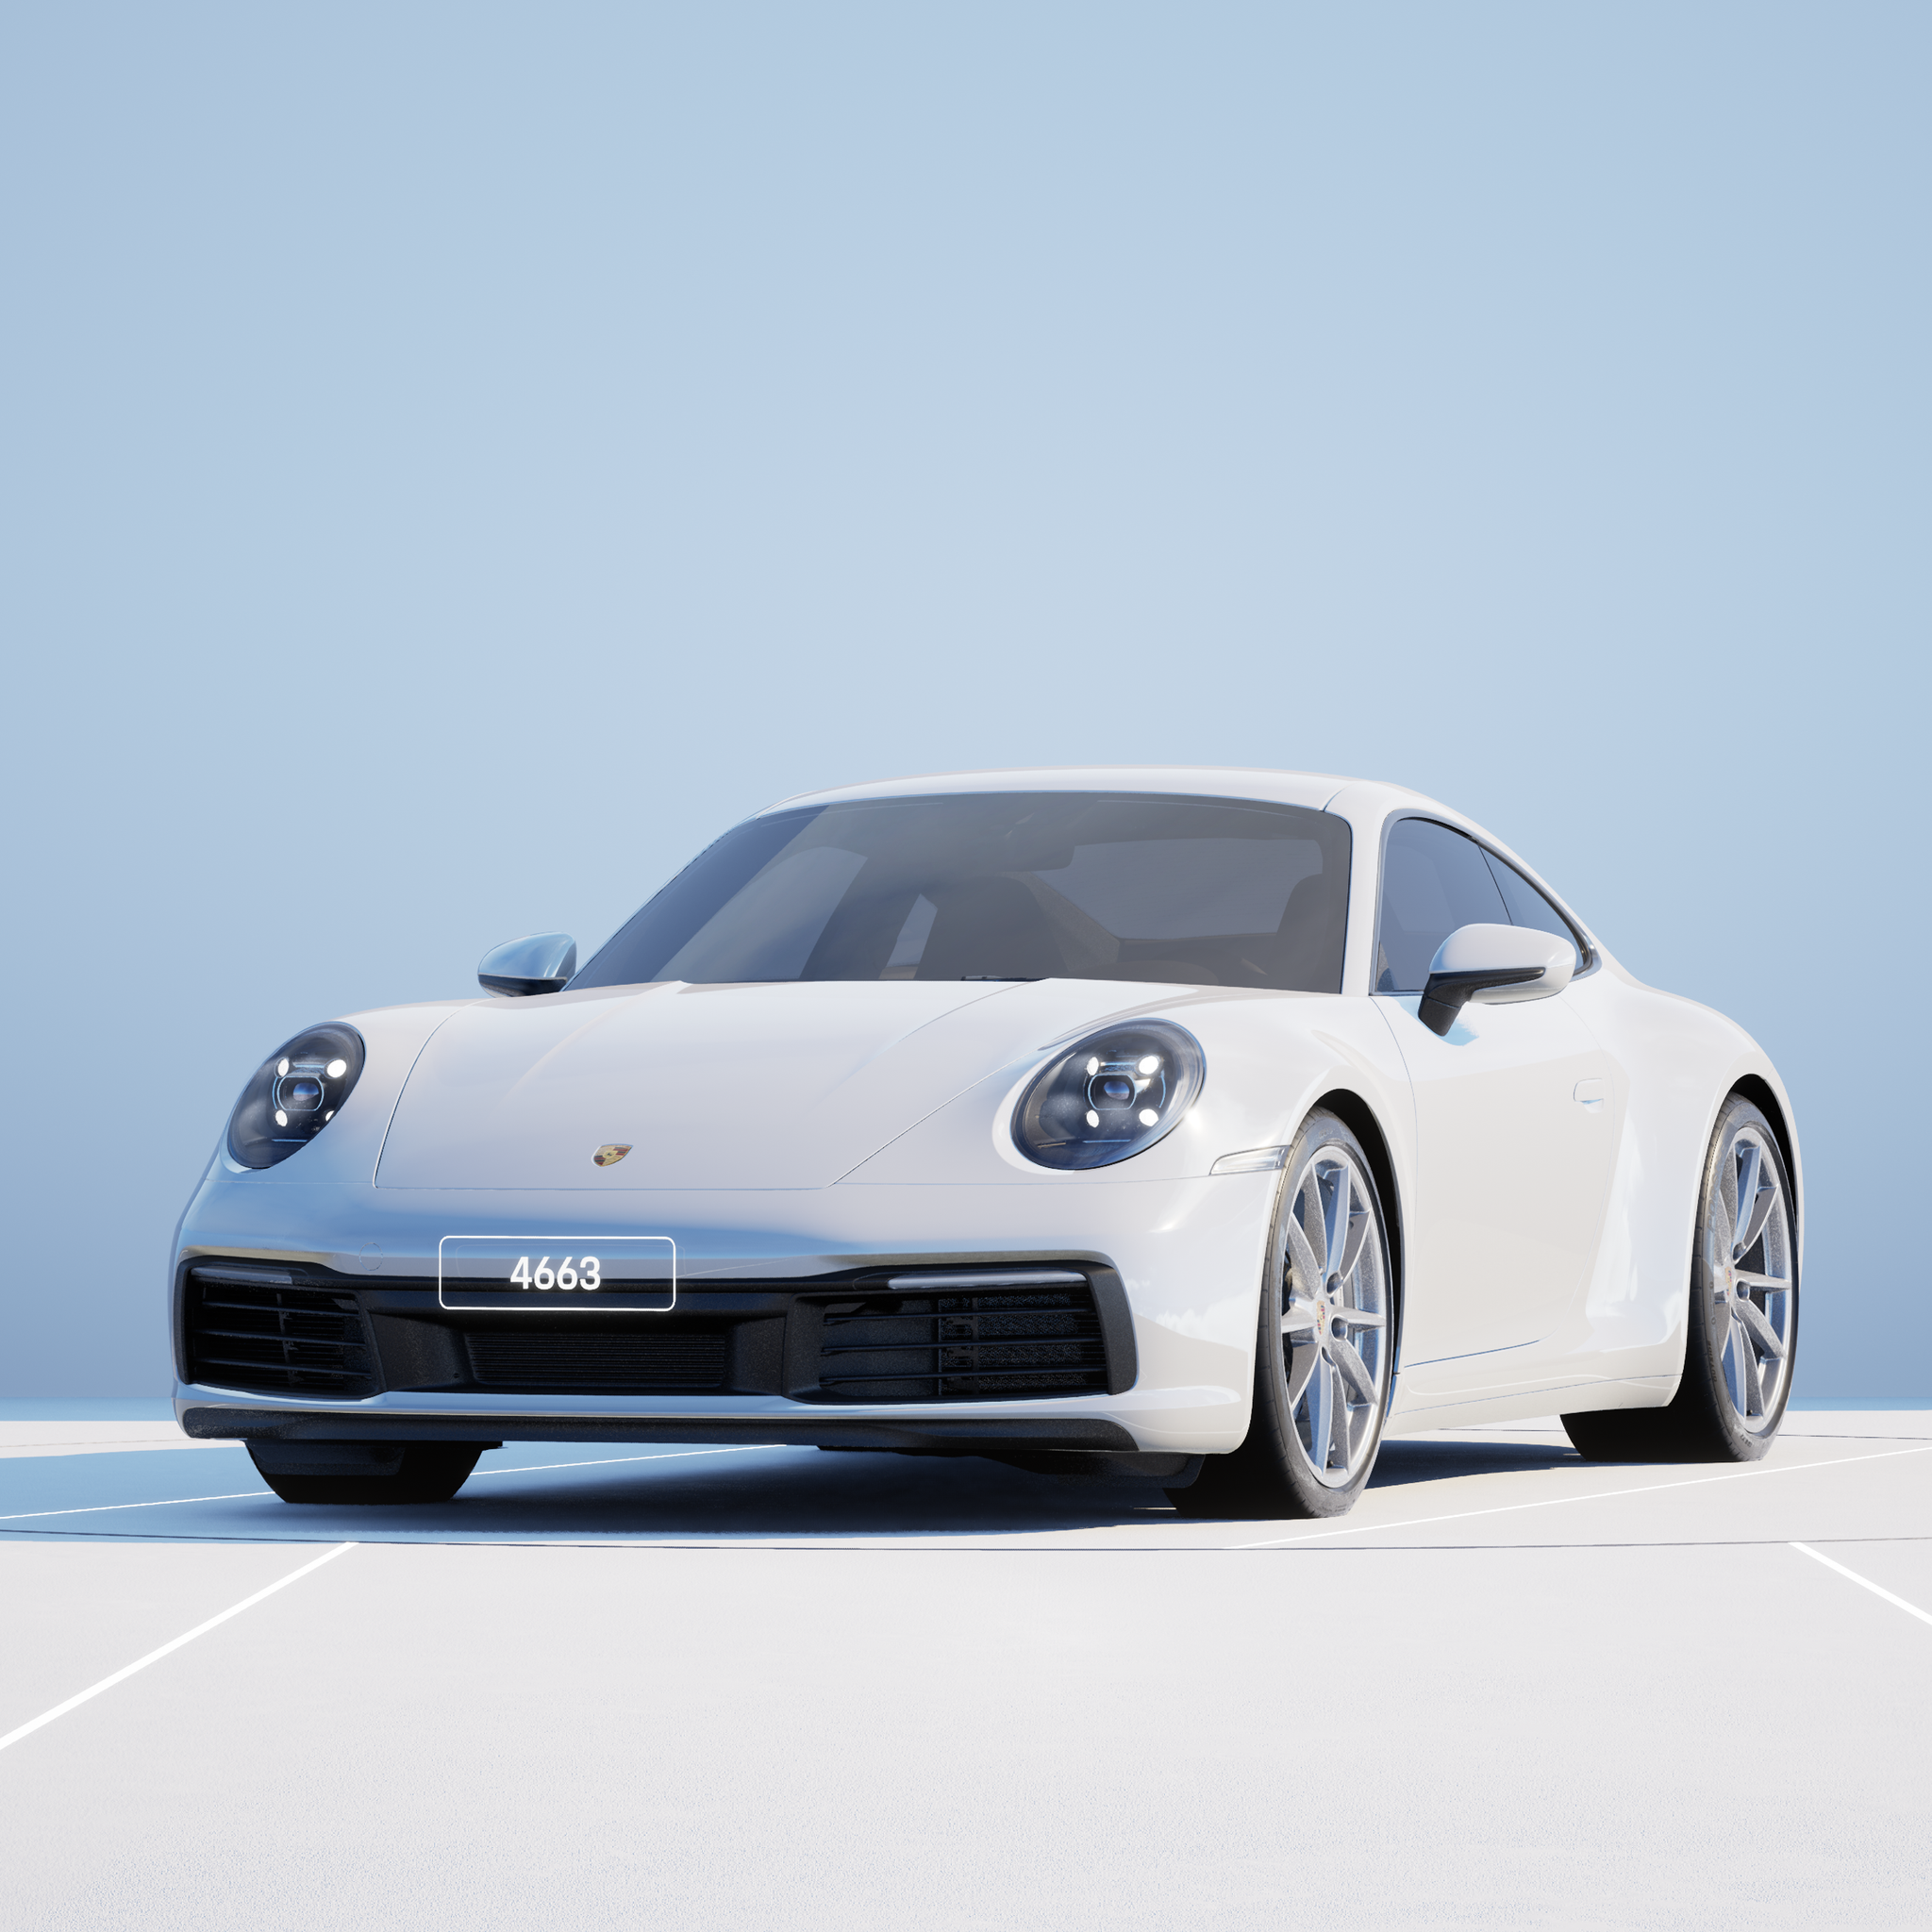 The PORSCHΞ 911 4663 image in phase